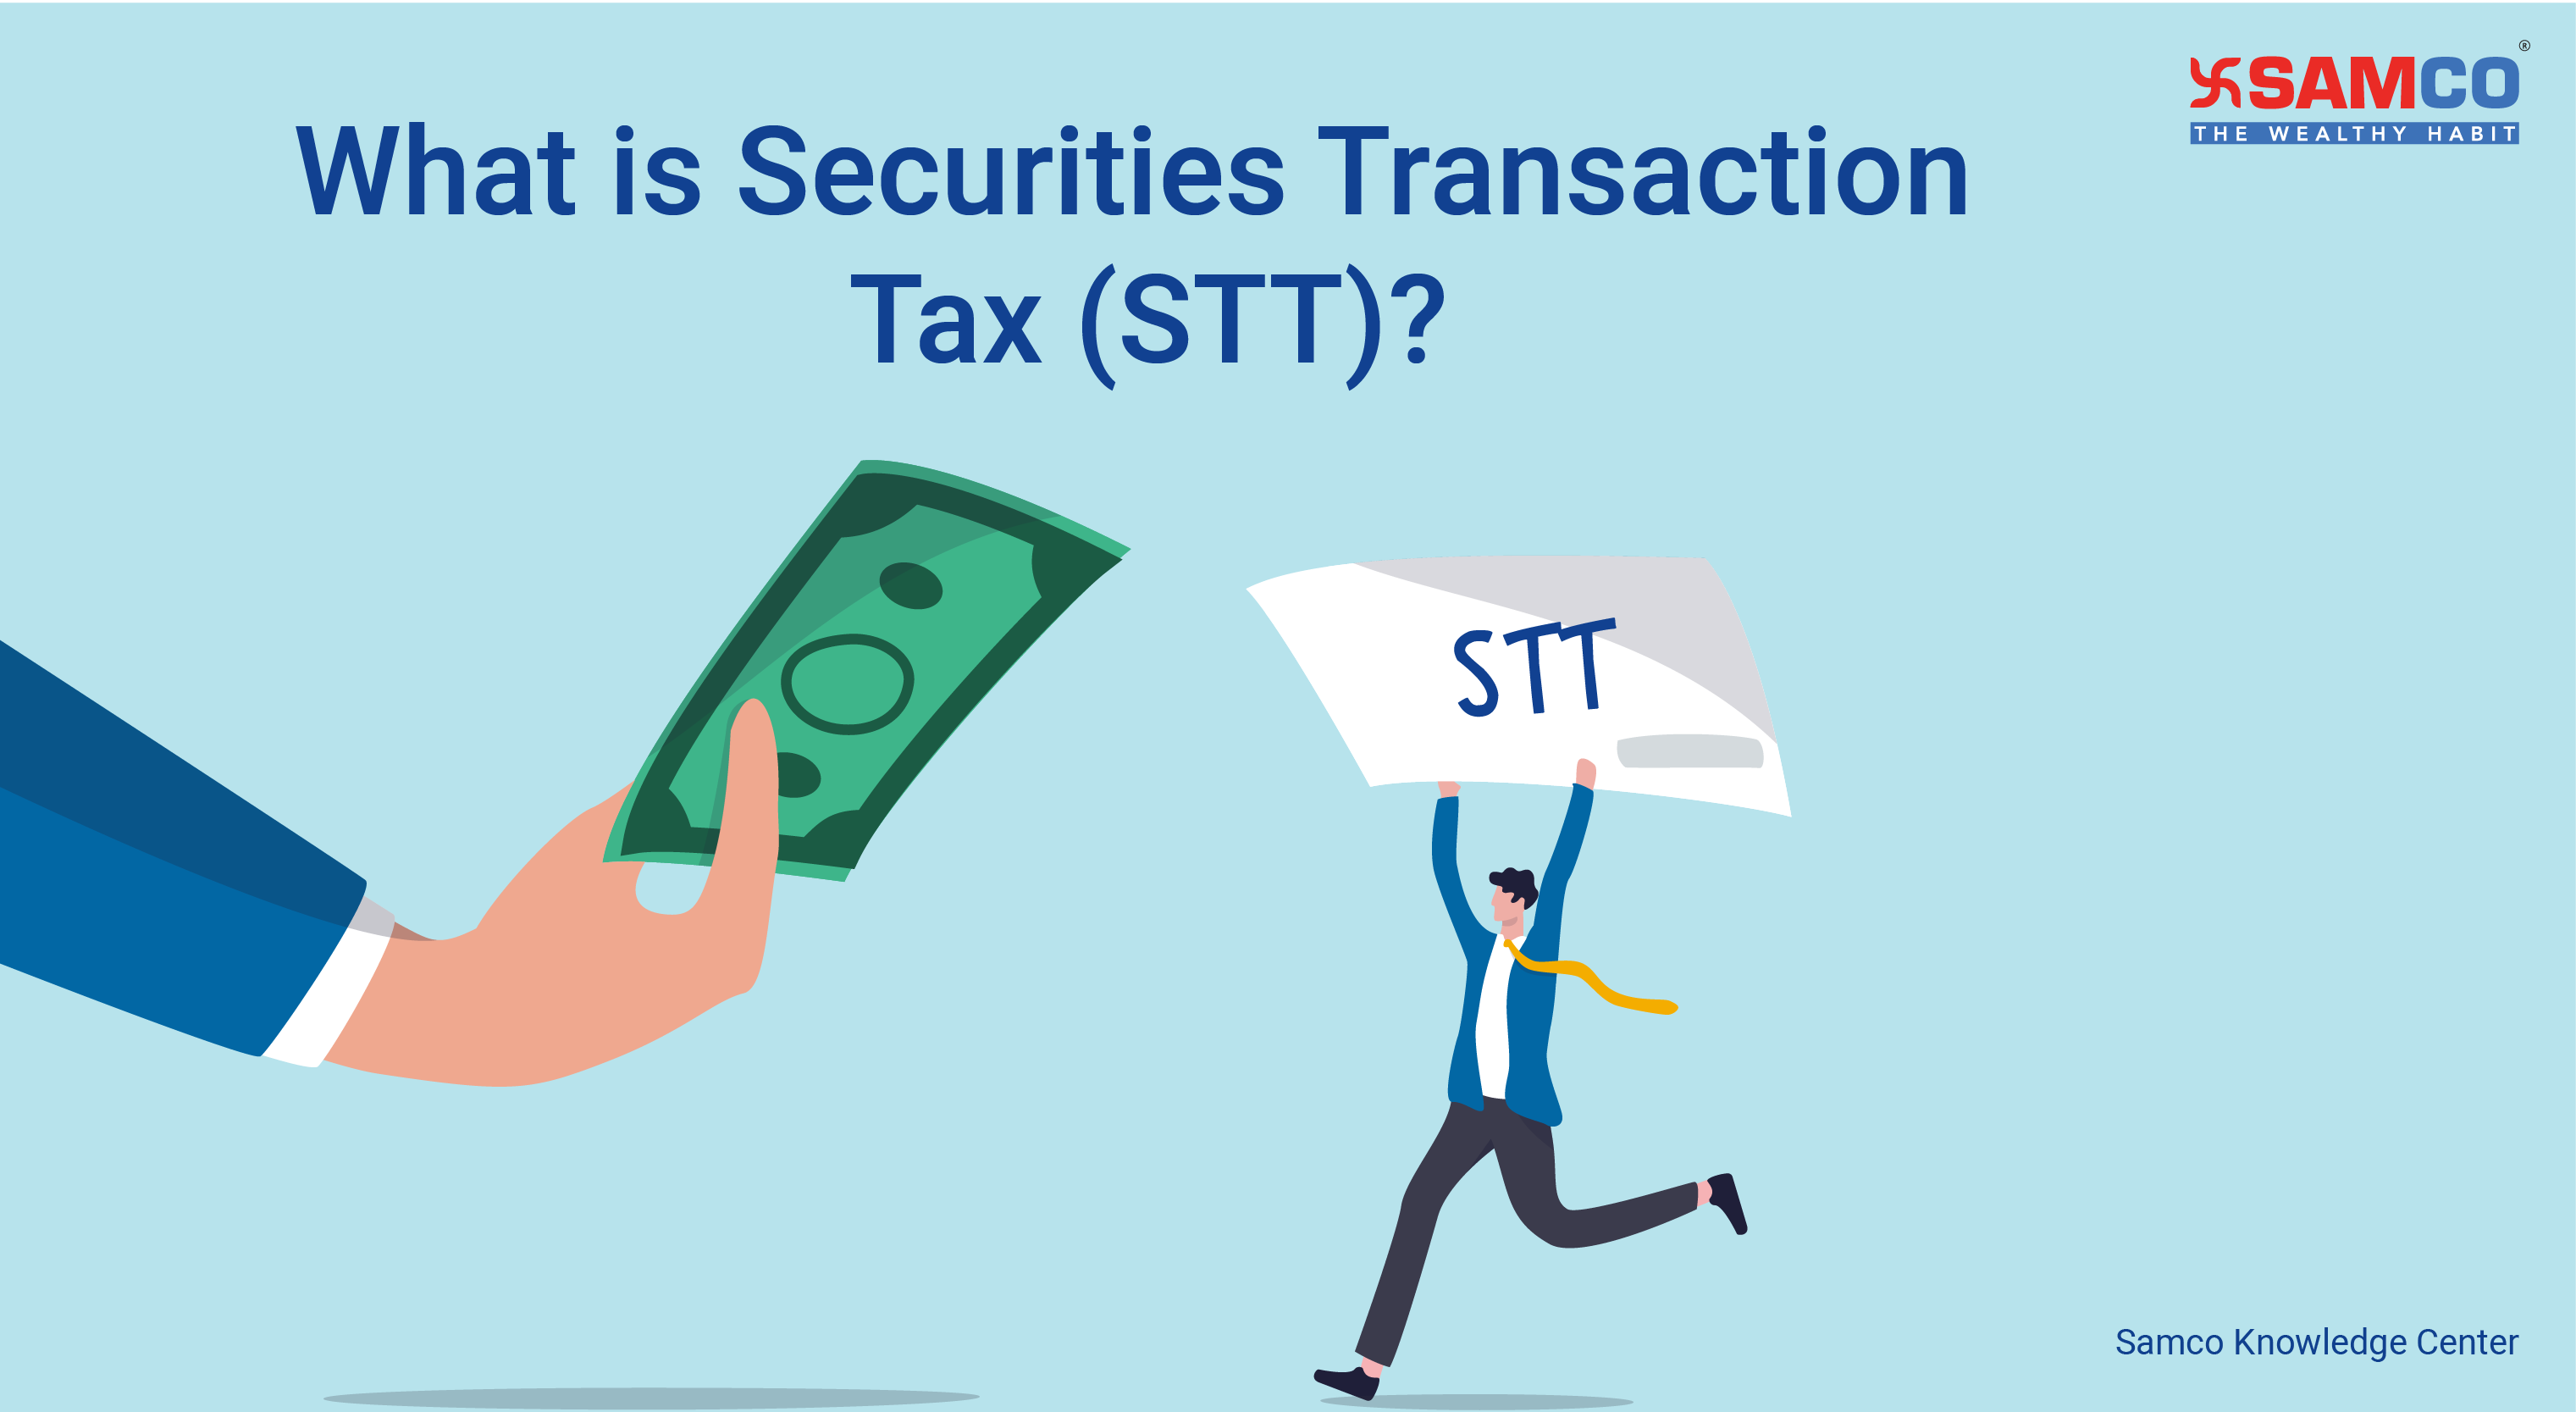 What is Securities Transaction Tax (STT)?